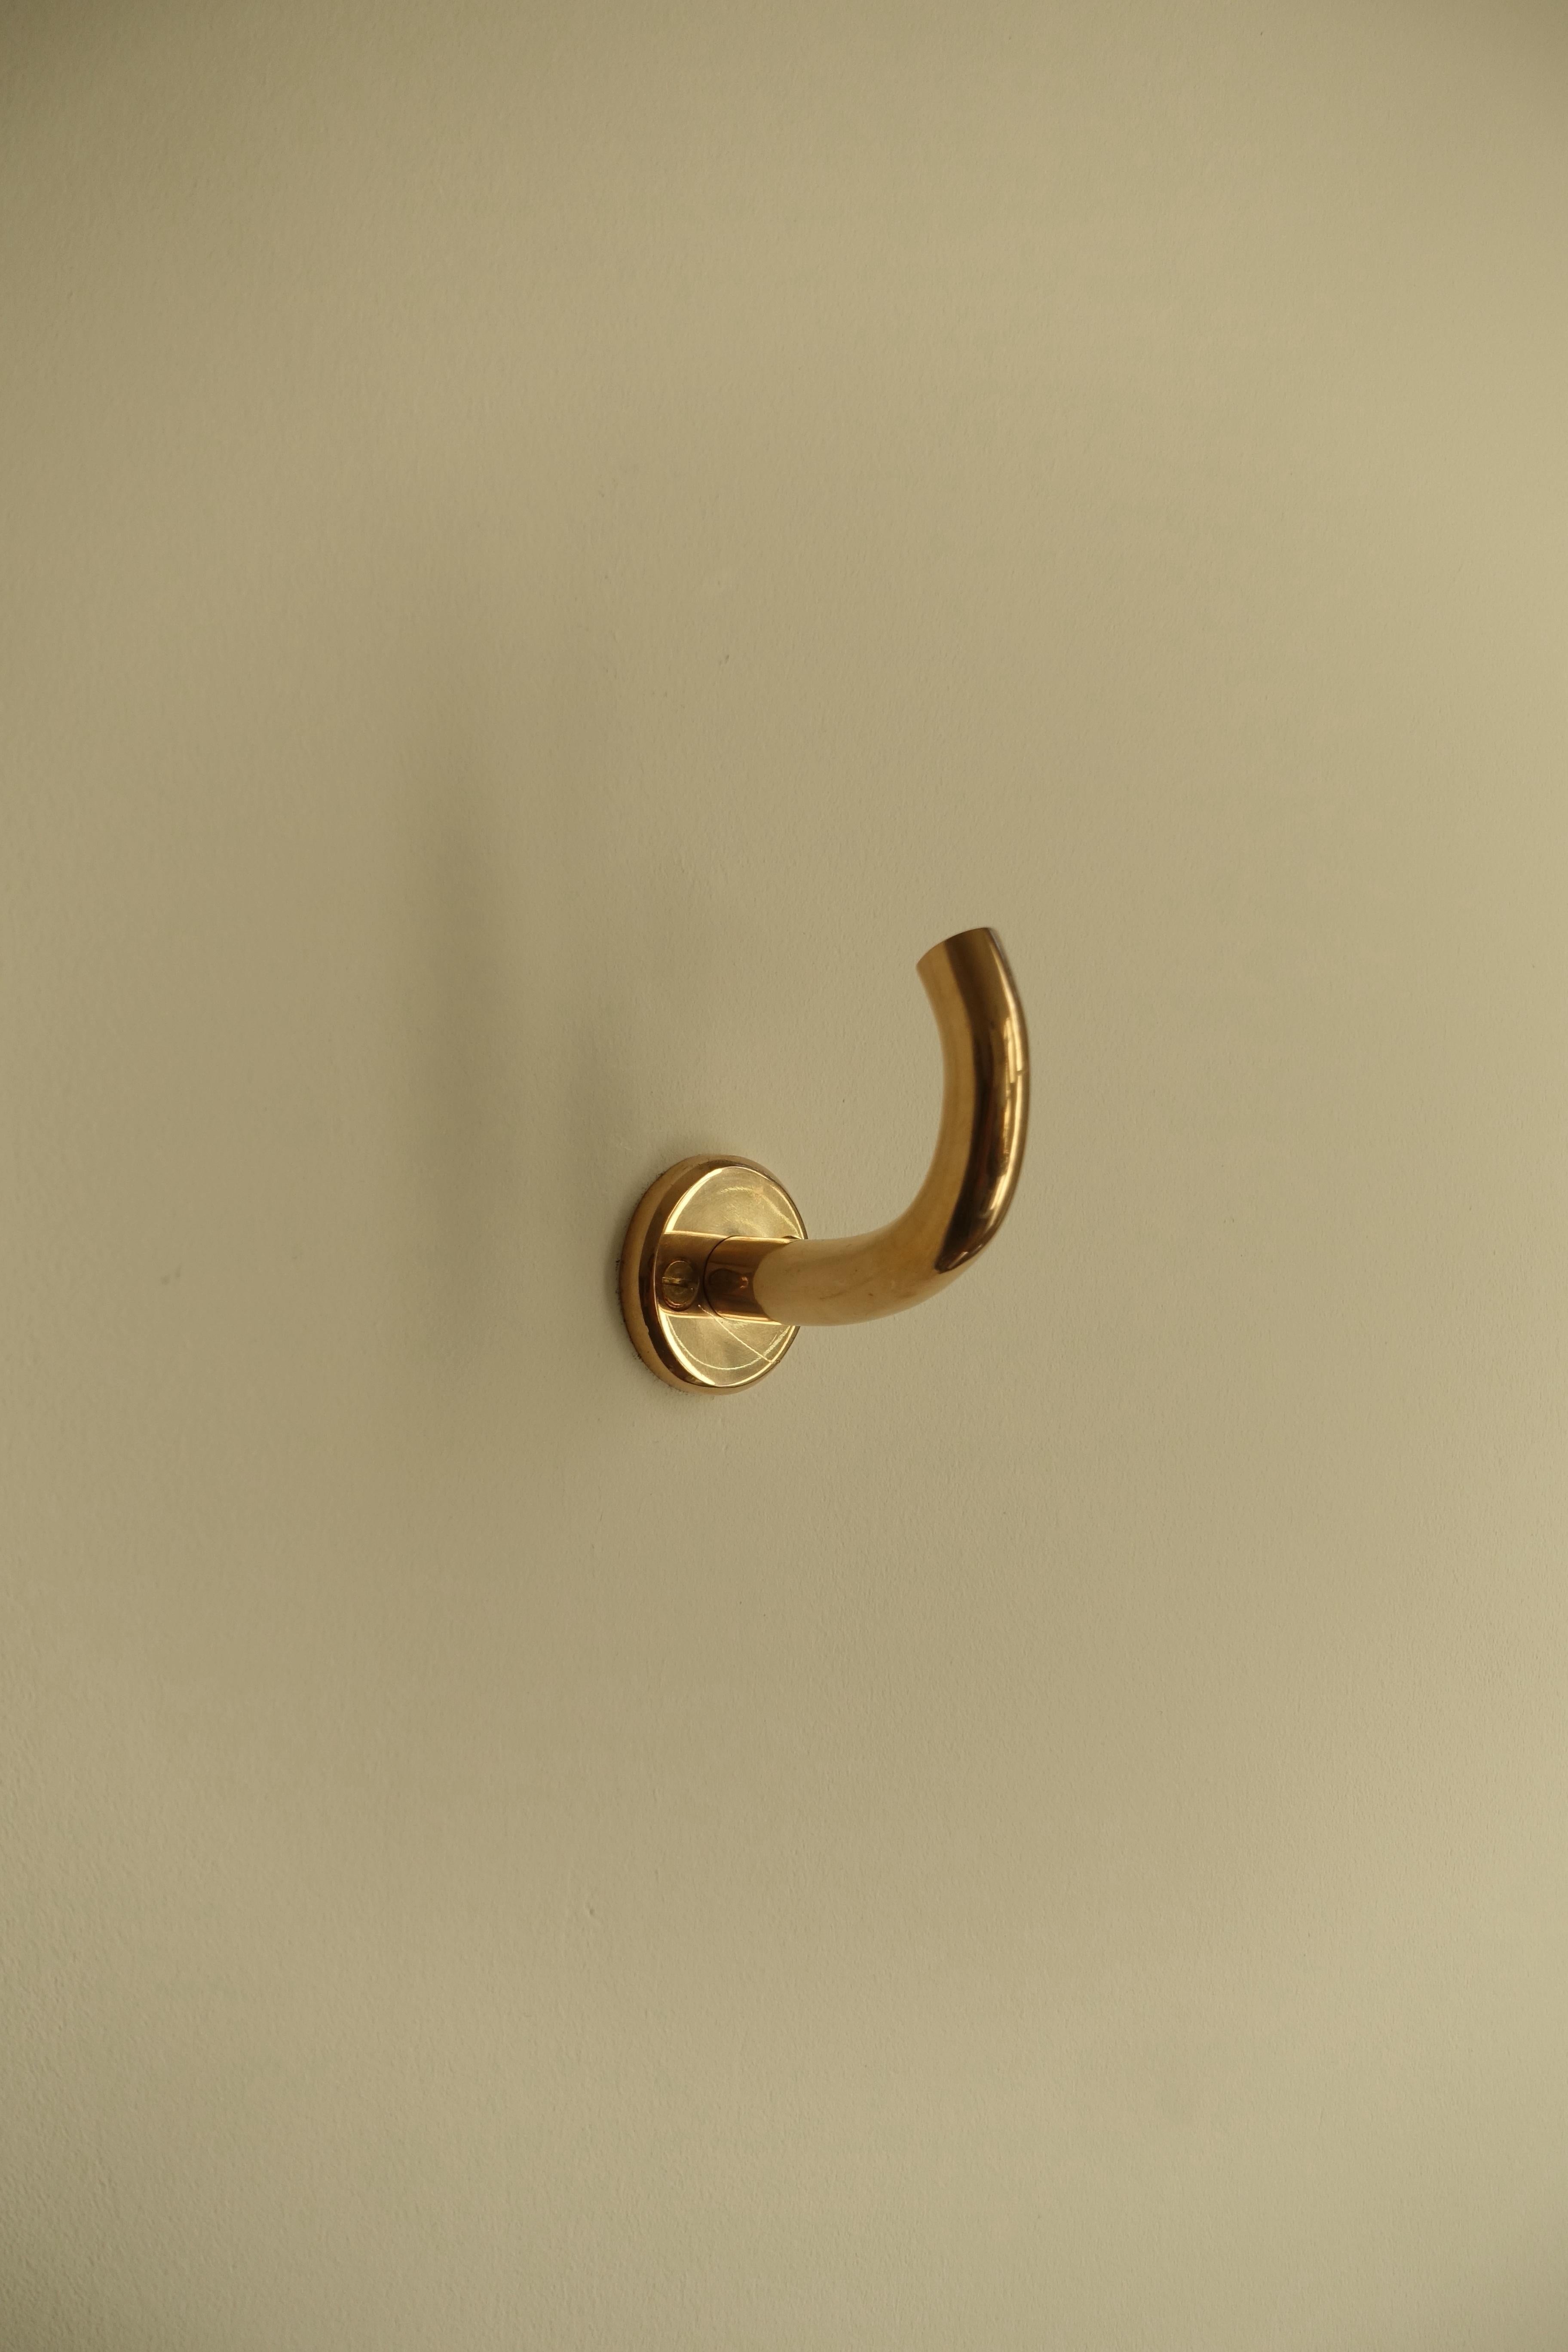 FAUNA Wall Hook In New Condition For Sale In Toronto, ON